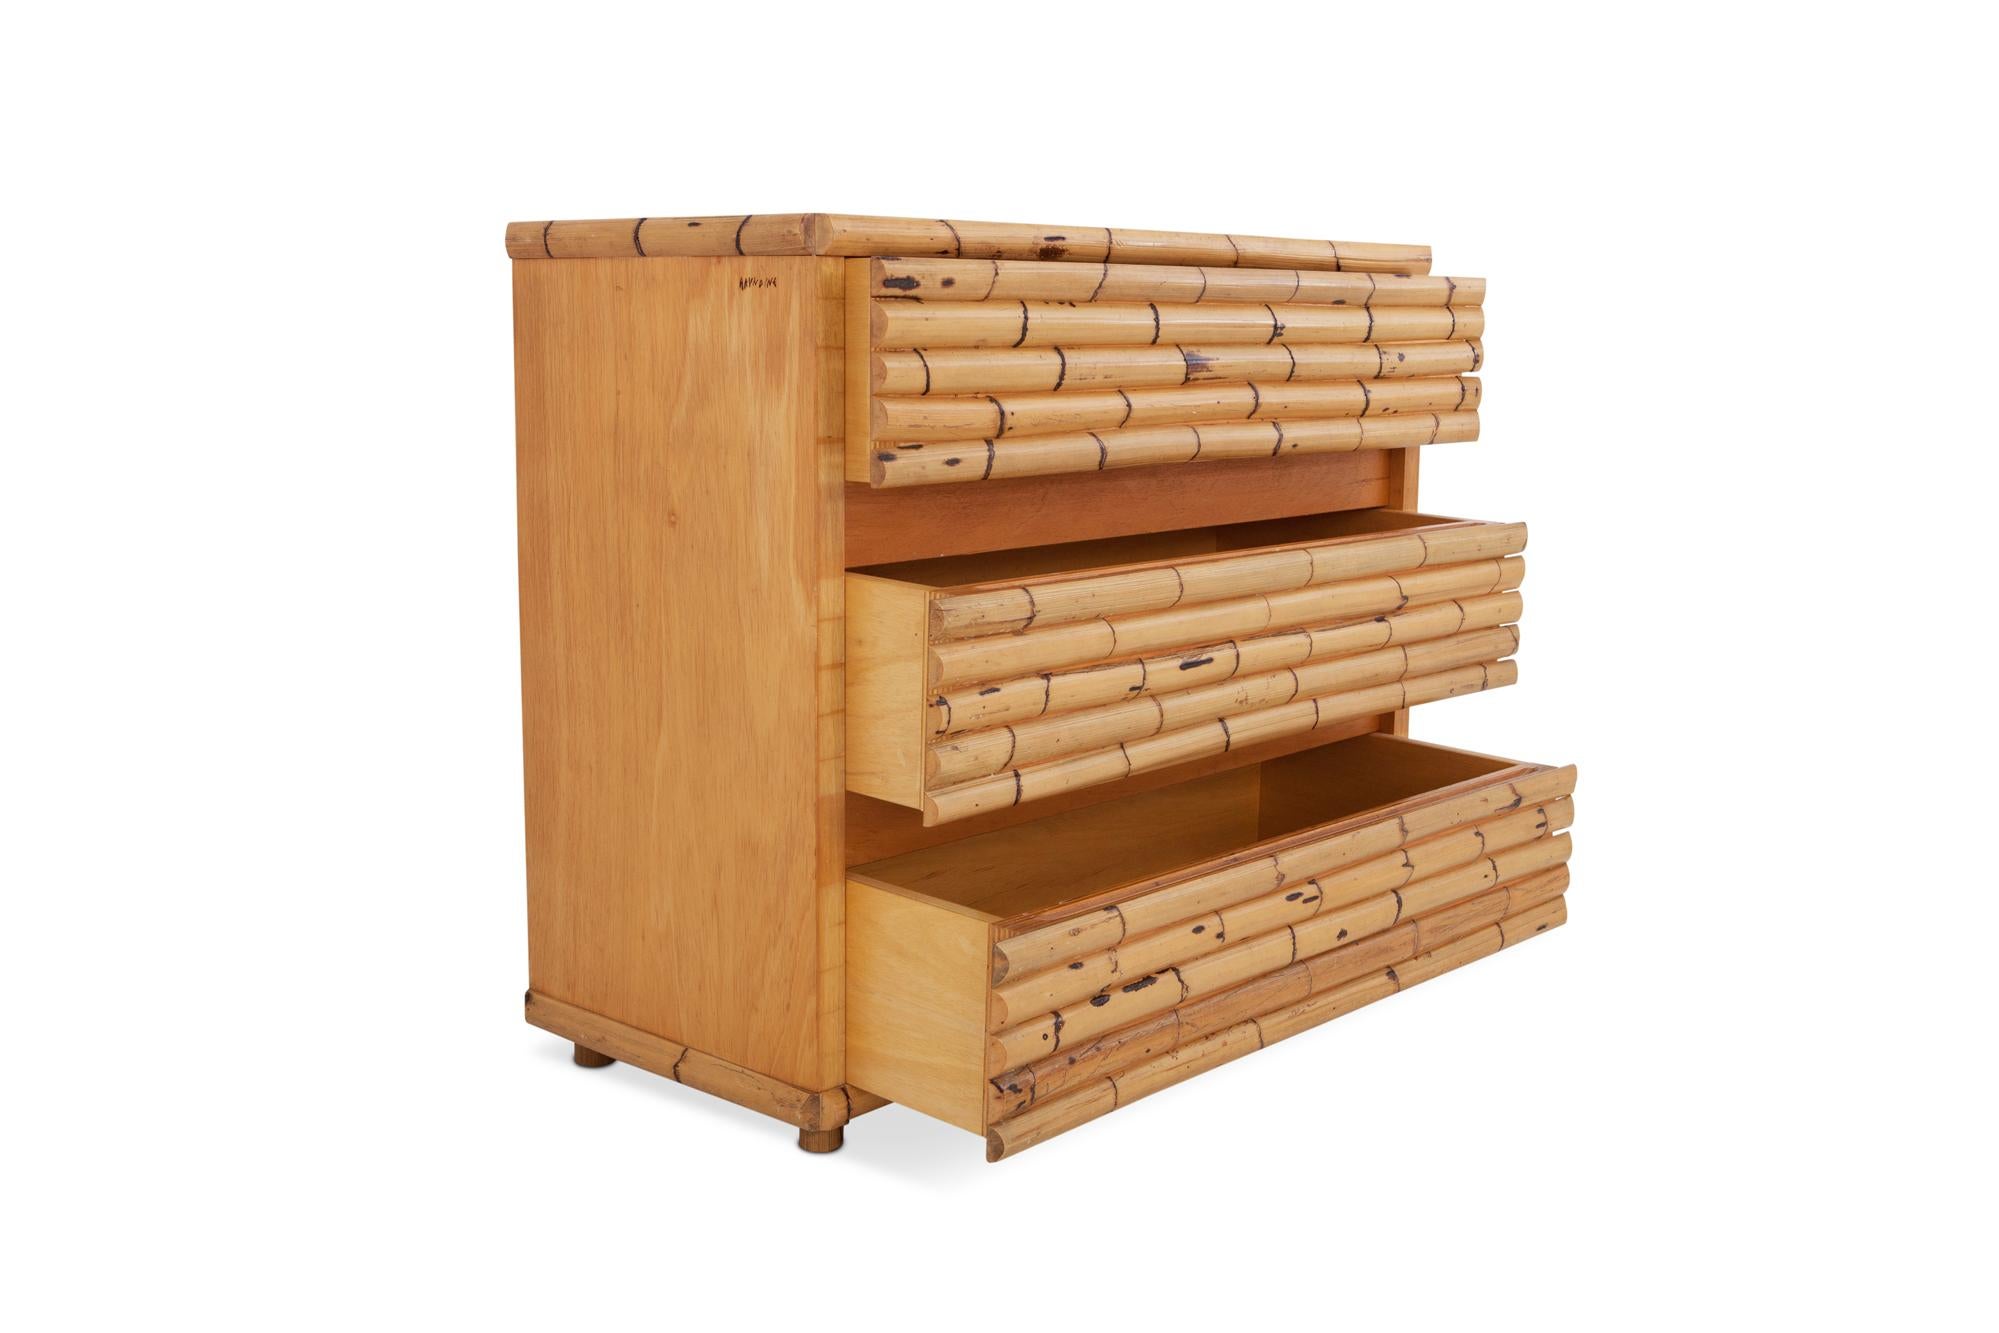 Mid-Century Modern Bamboo Chest of Drawers    by Venturini